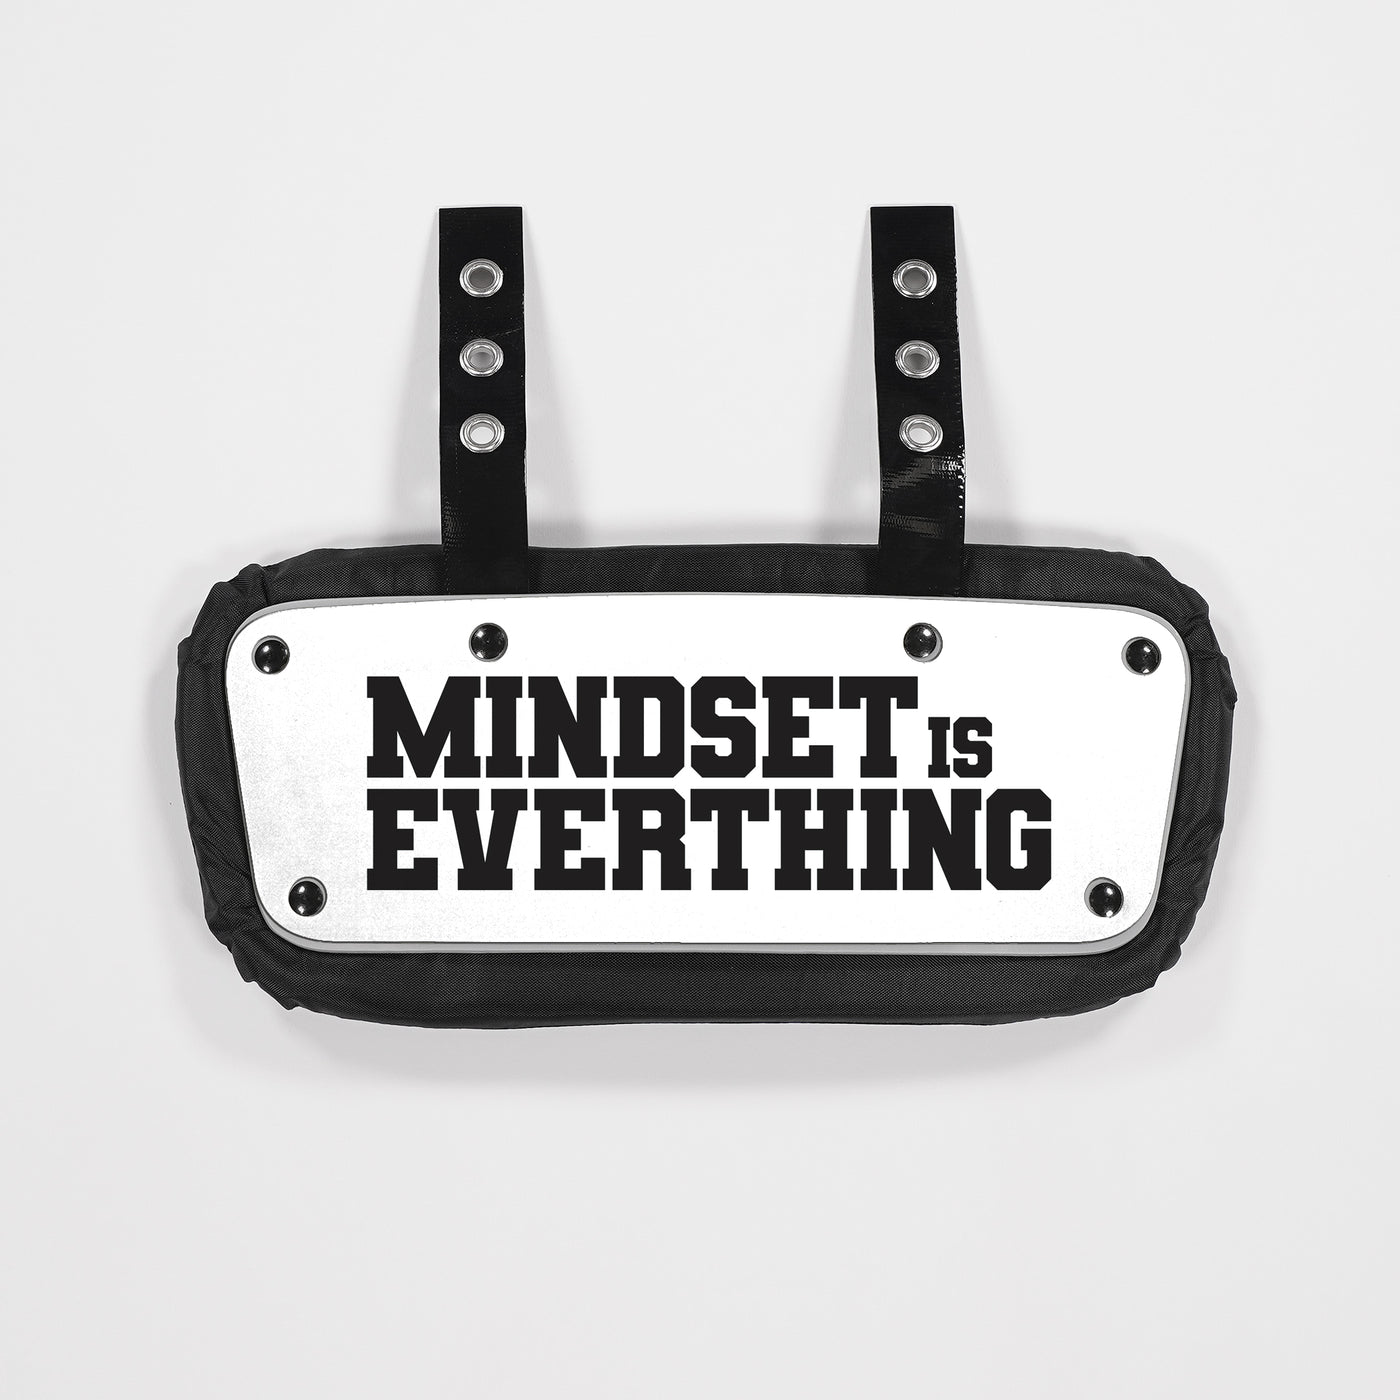 Mindset is Everything Sticker for Back Plate